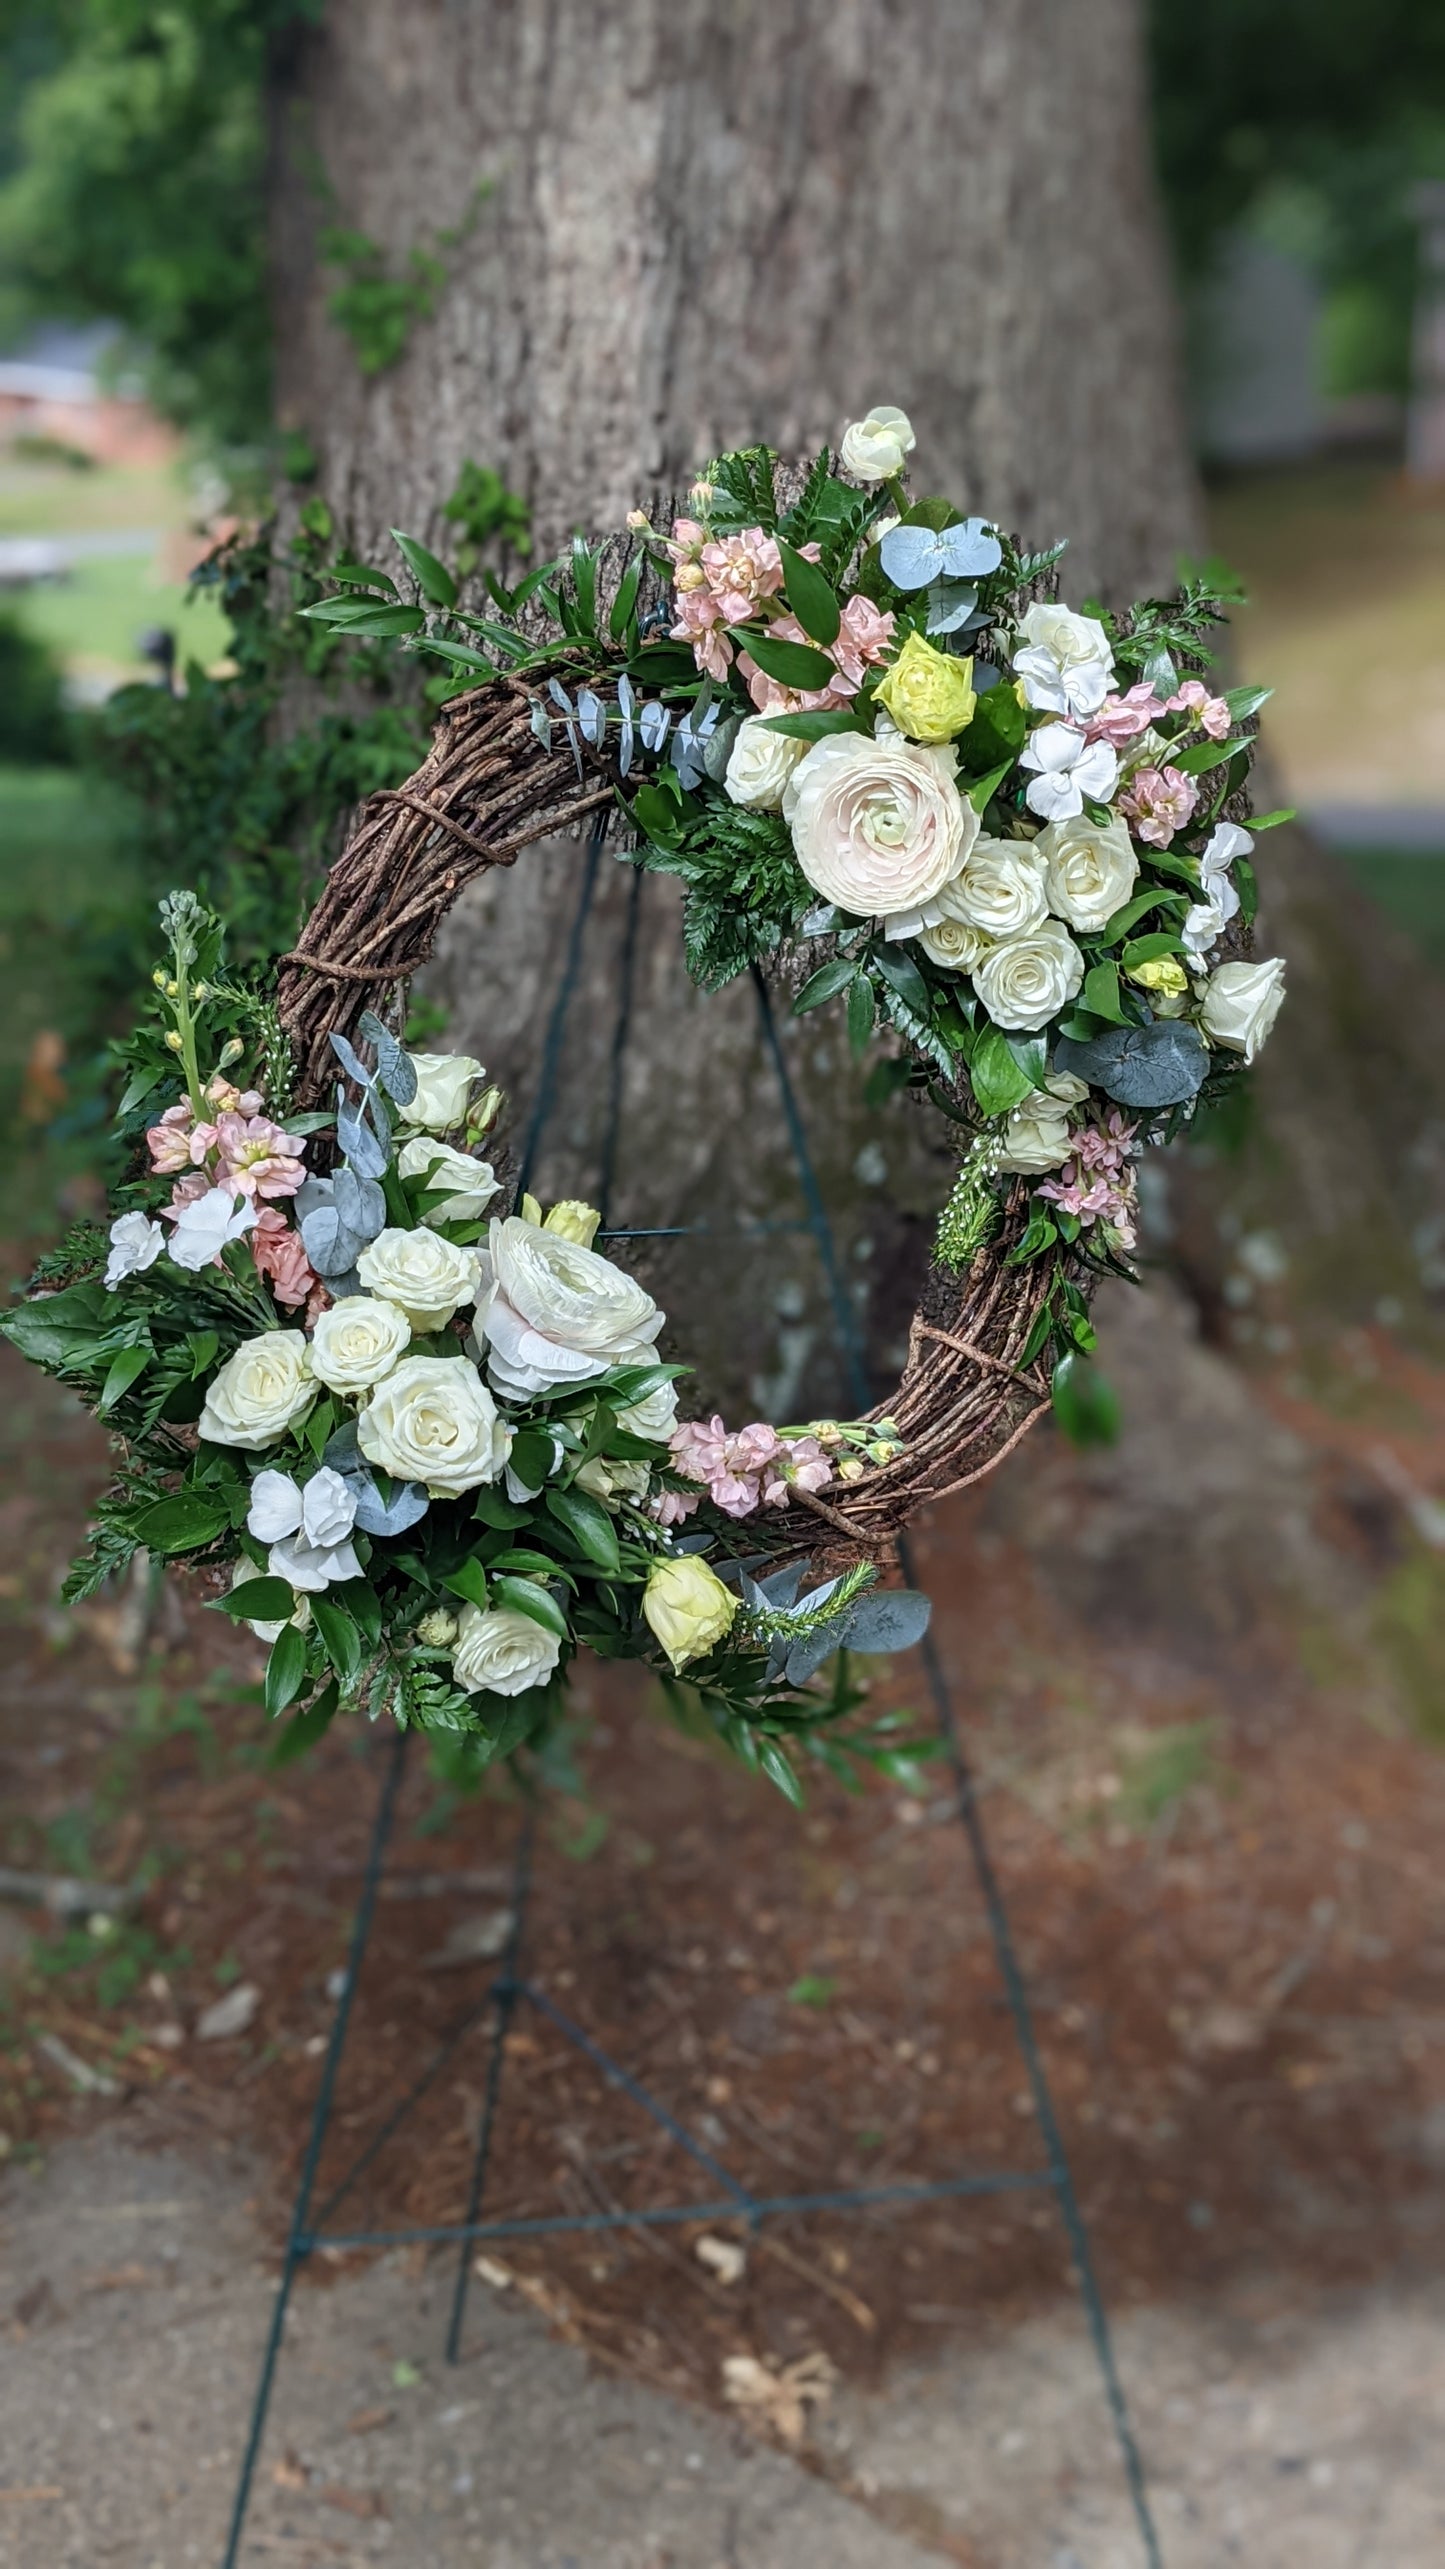 Grapevine Wreath
This grapevine wreath is made foam free with compostable Agrawool. Order for a beautiful door decoration or to pay tribute to a loved one. Available as half wreath coverage, or whole wreath coverage.Please include flower and color preferences. Some flowers may not be available for same day orders.
Funeral
FloralsbyHeidiCatherine